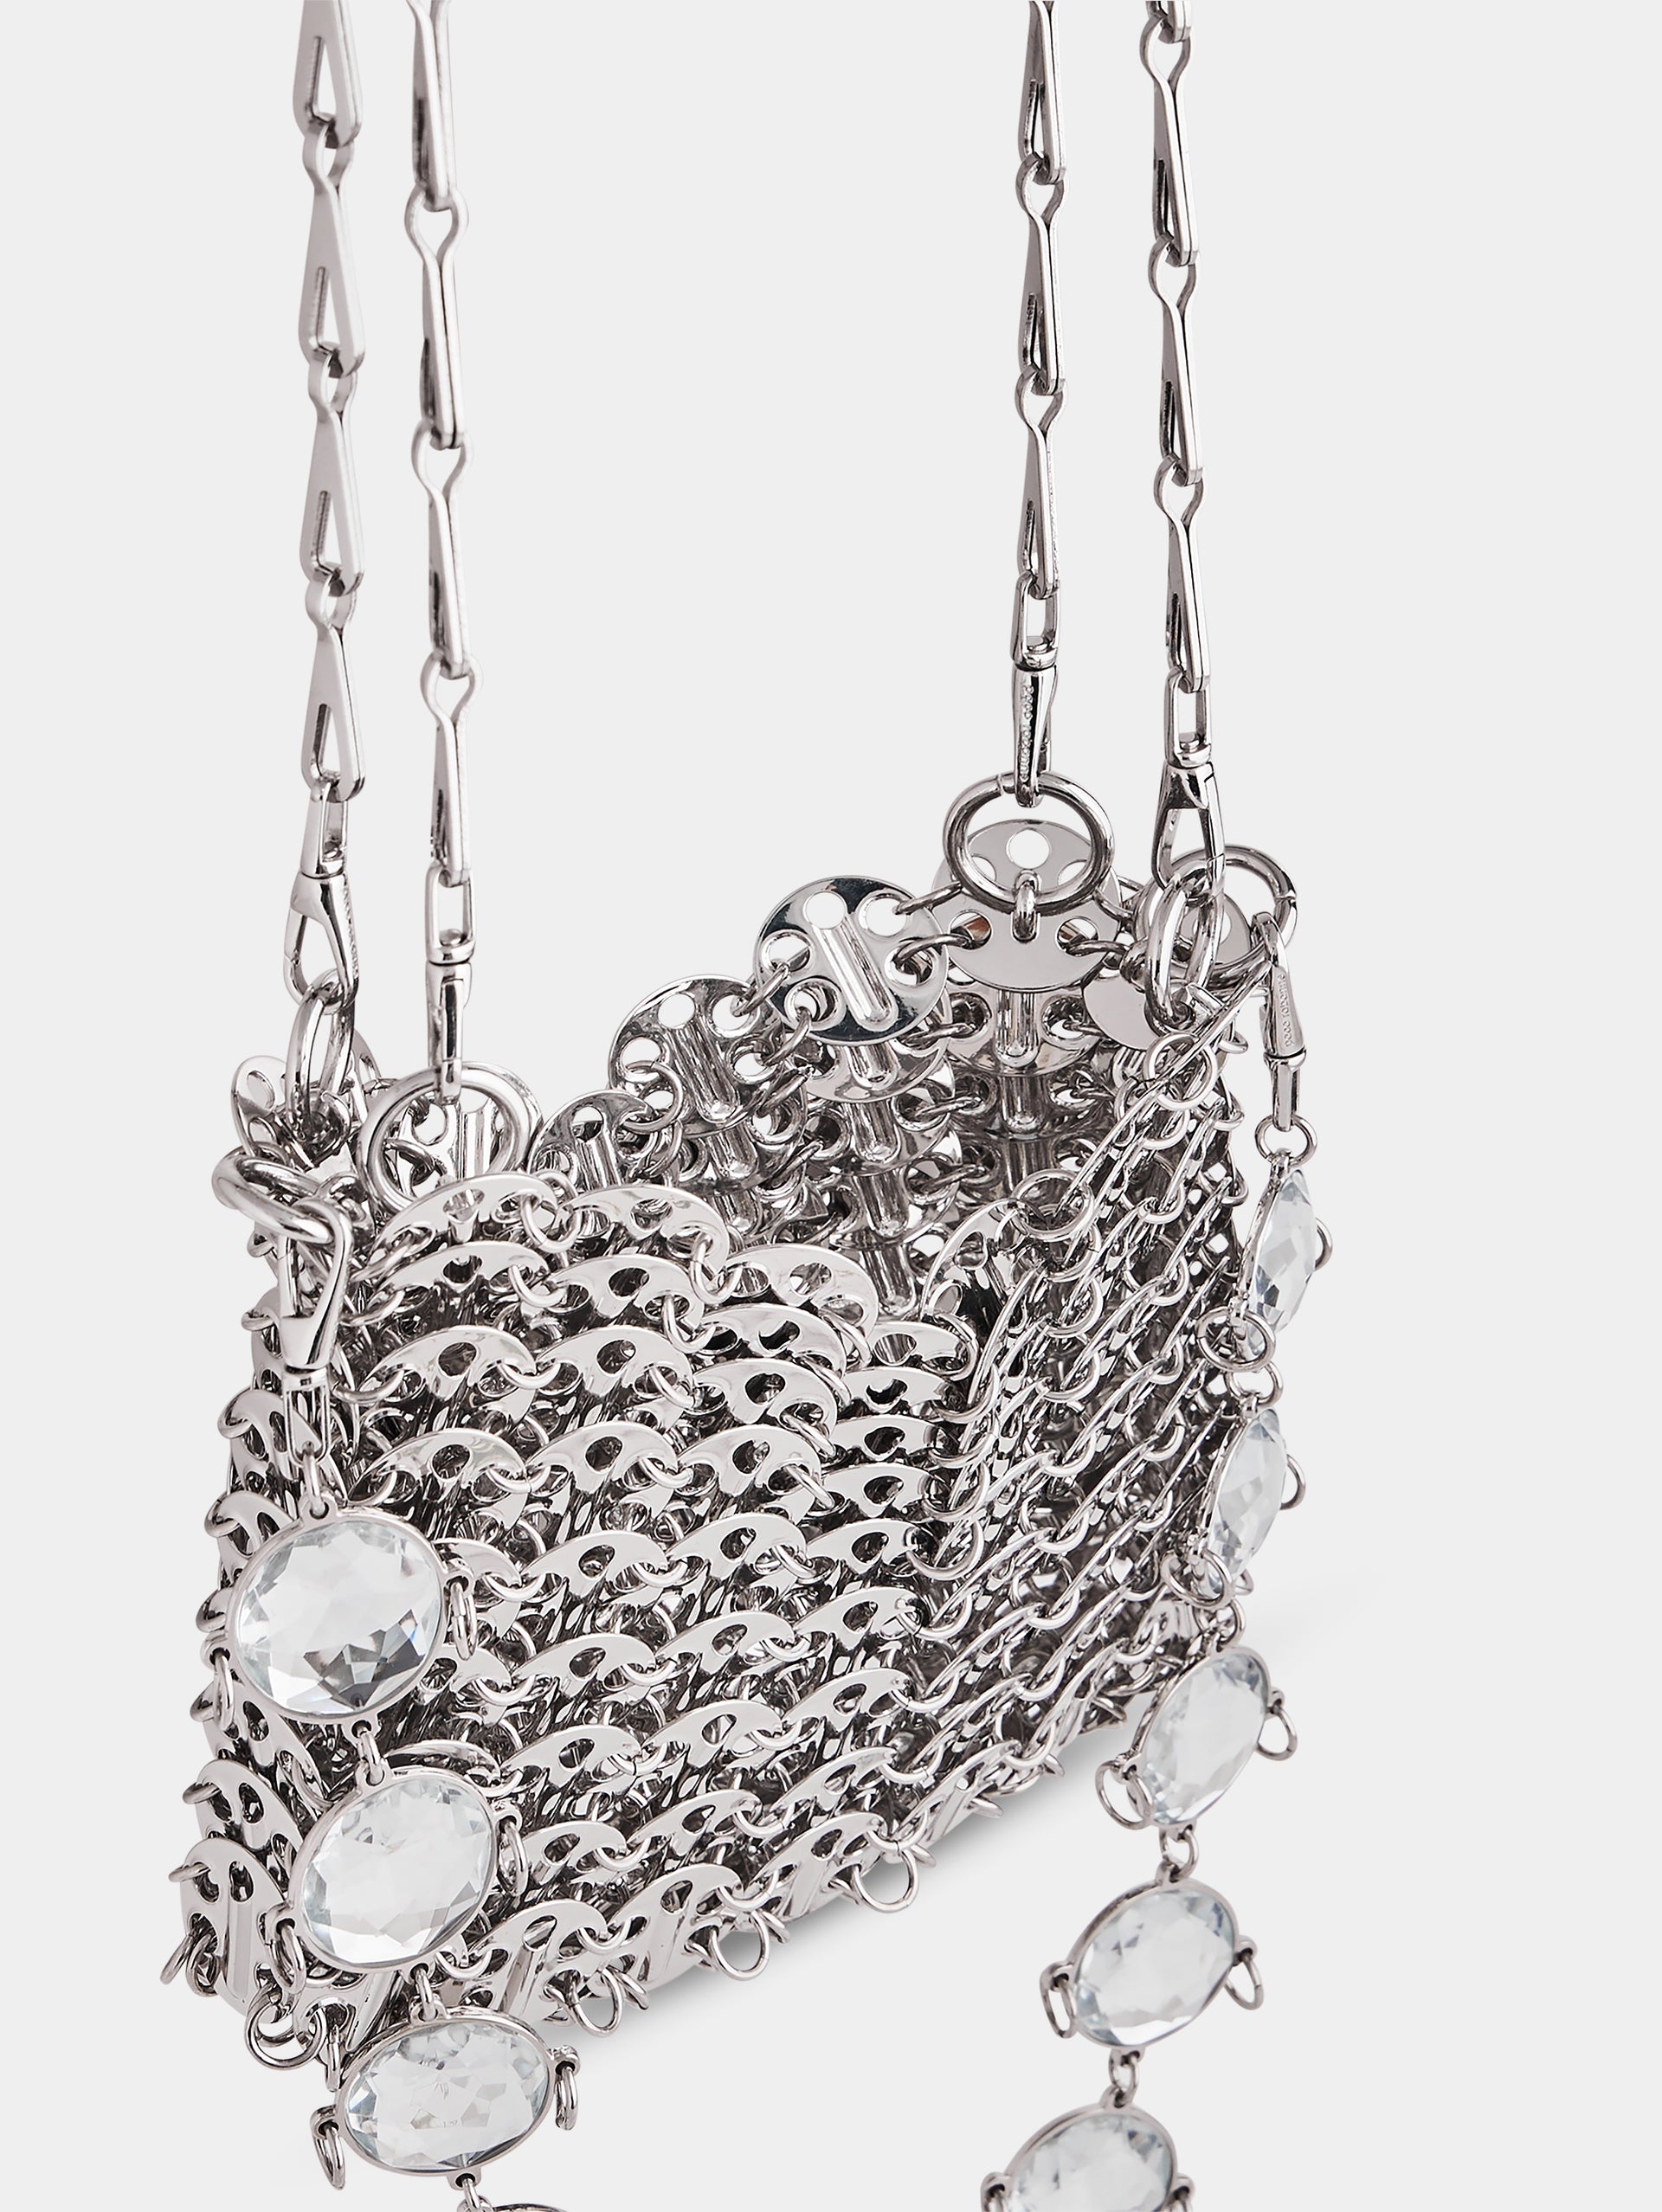 ICONIC NANO 1969 BAG WITH OVERSIZED CRYSTALS CHAIN - 5